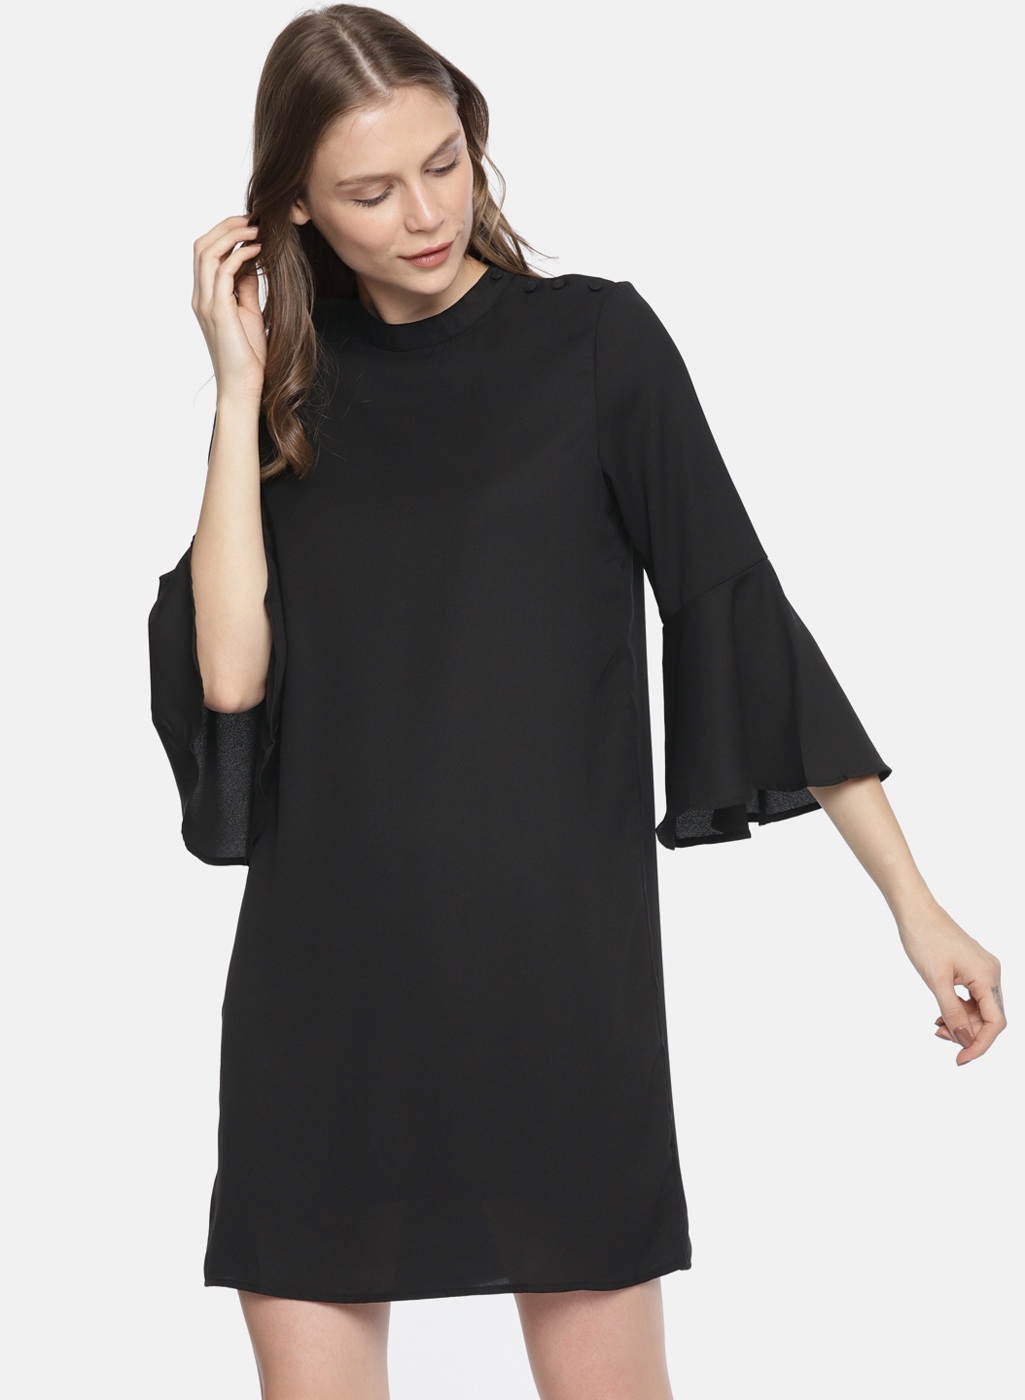 Black Solid A-Line Dress Price in India